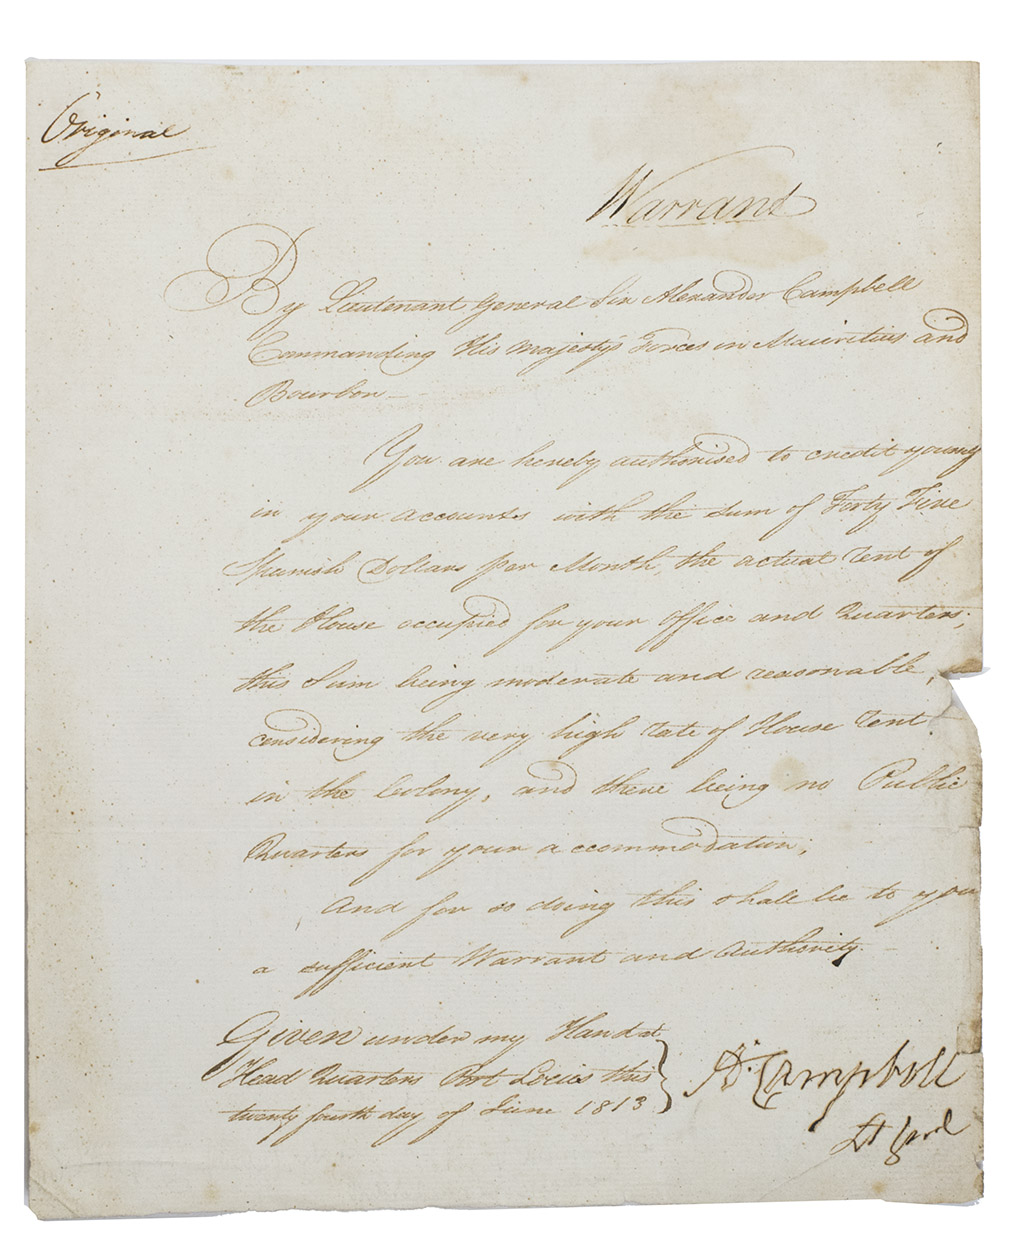 [MILITARIA - MAURITIUS]. CAMPBELL, Alexander. - [Warrant to authorize the occupation of a house for His Majesty's forces in Mauritius and Bourbon].Port-Louis, 24 June 1813. 4to. Manuscript warrant written in ink on paper, signed. Loosely inserted in a later orange paper folder.